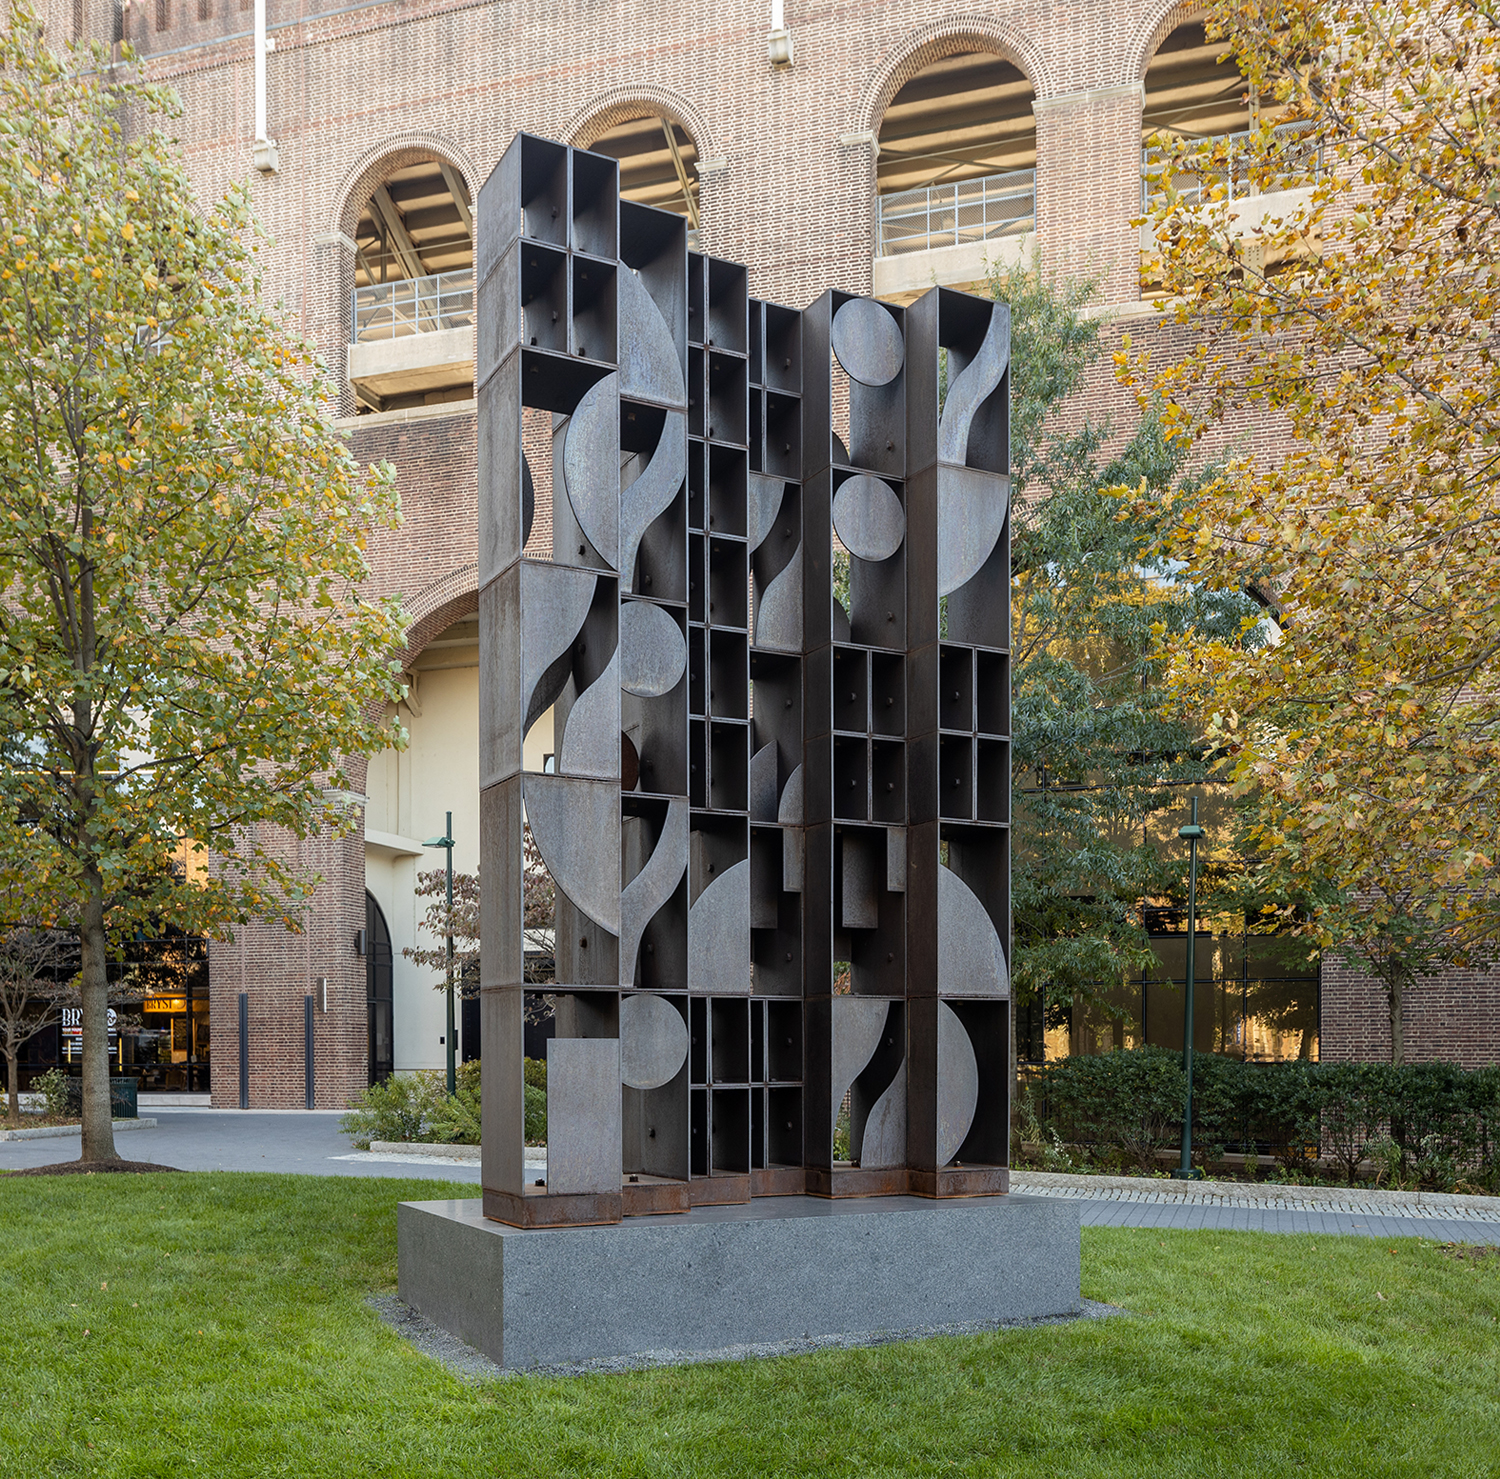 Tall geometric cor-ten steel sculpture by Louise Nevelson on University of Pennsylvania campus